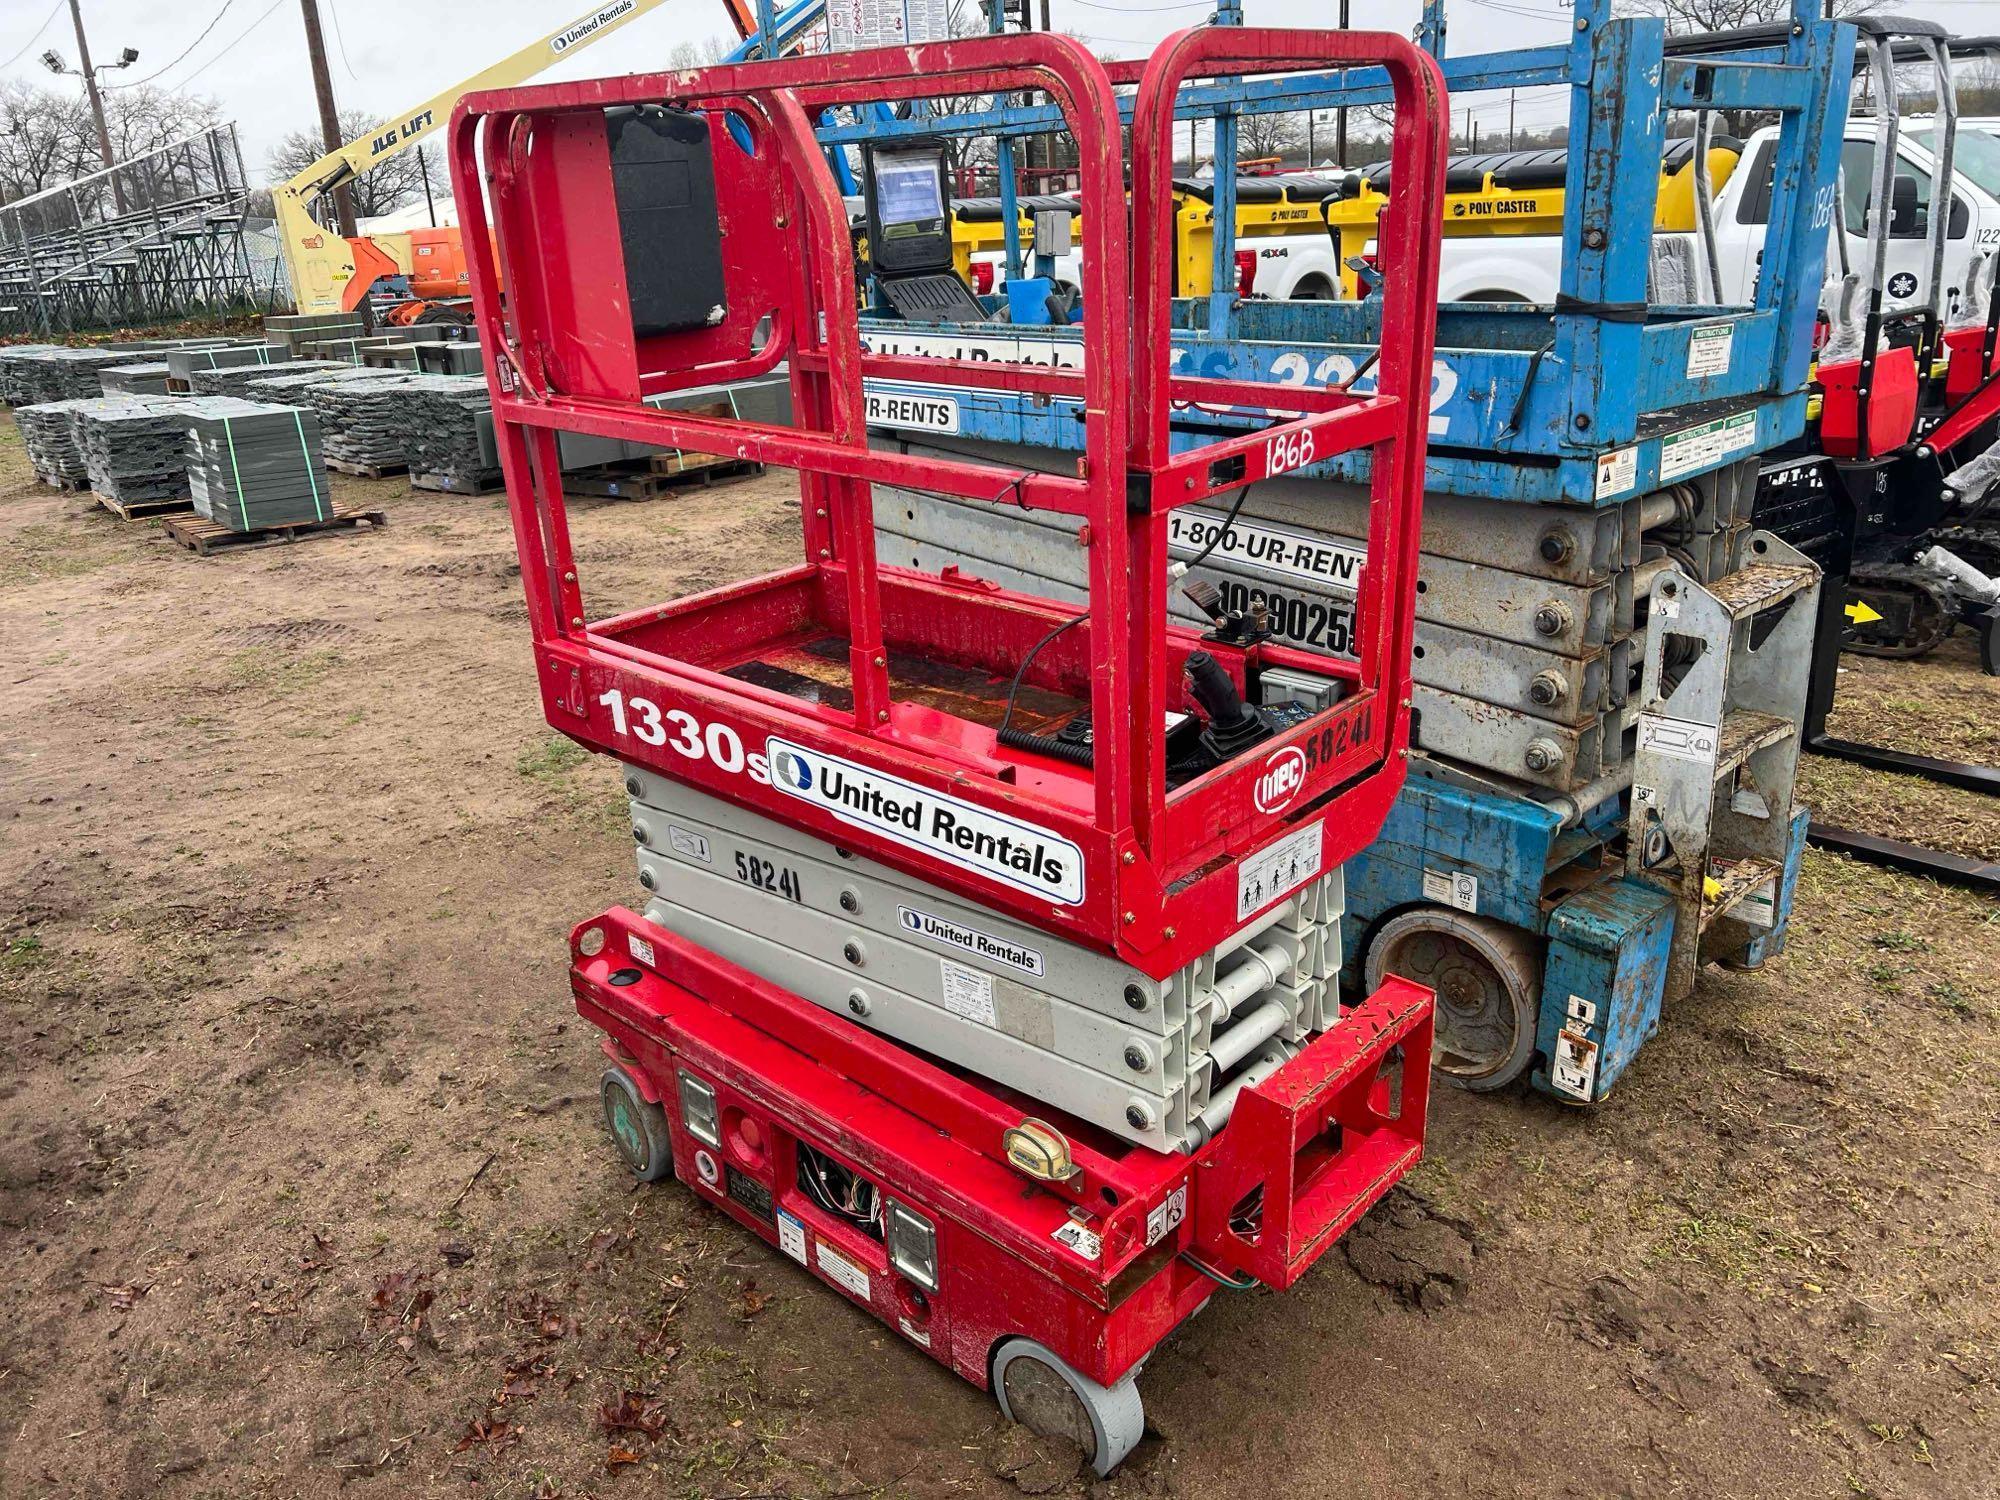 2018 MEC 1330SE SCISSOR LIFT SN:16302287 electric powered, equipped with 13ft. Platform height,